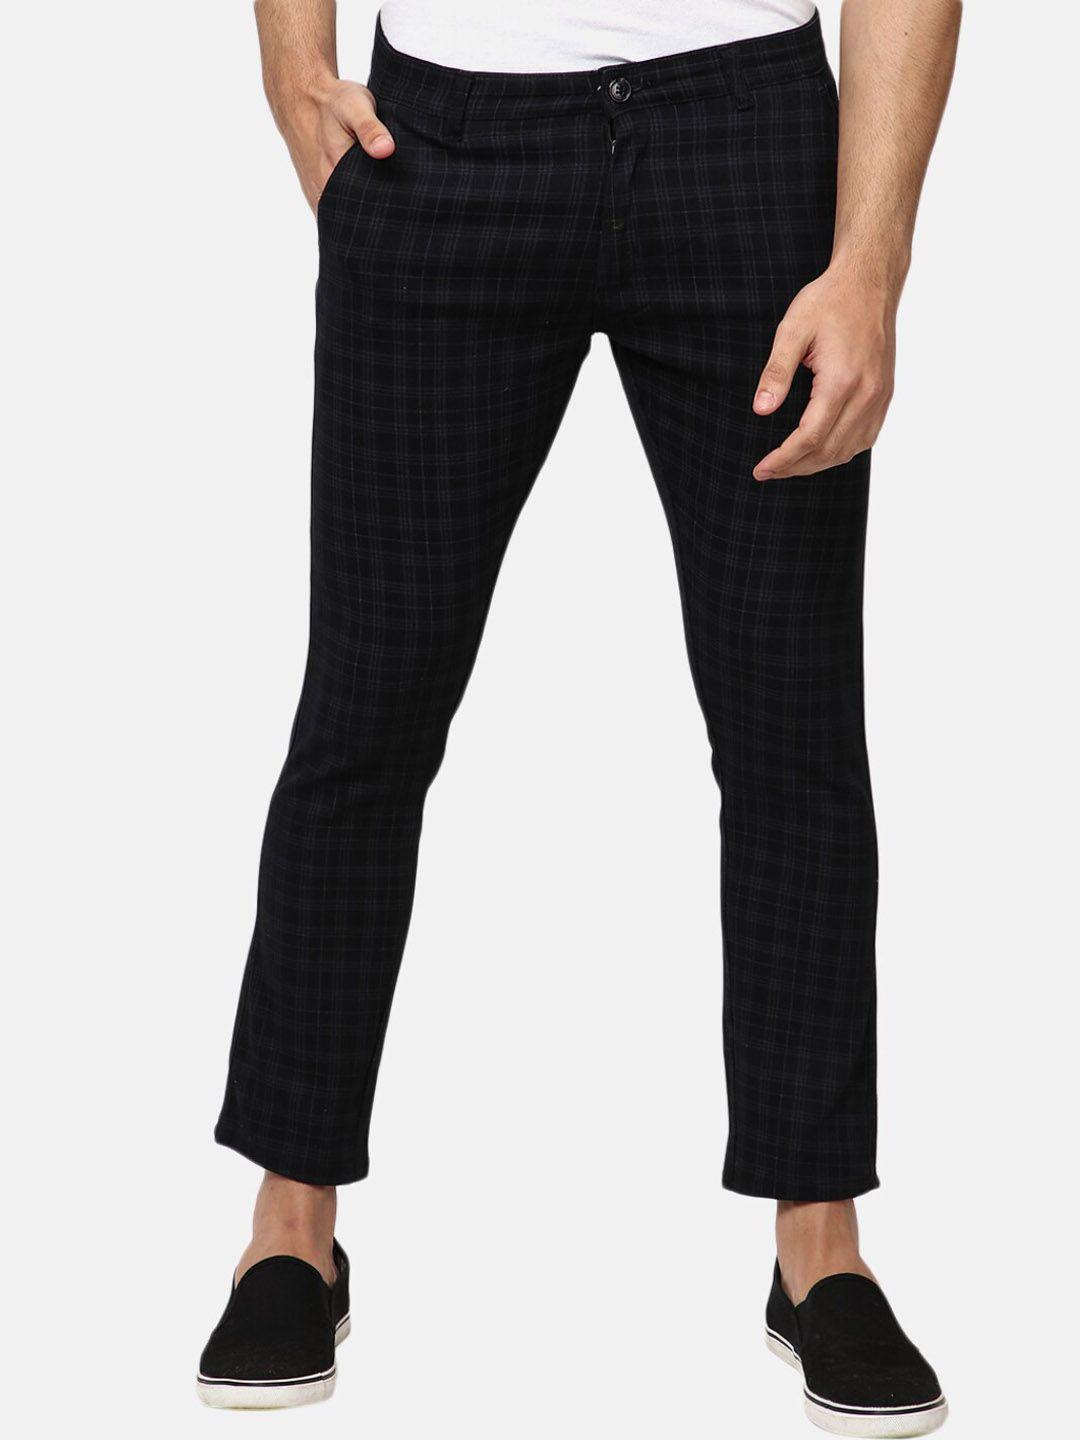 v-mart men black checked easy wash chinos trousers